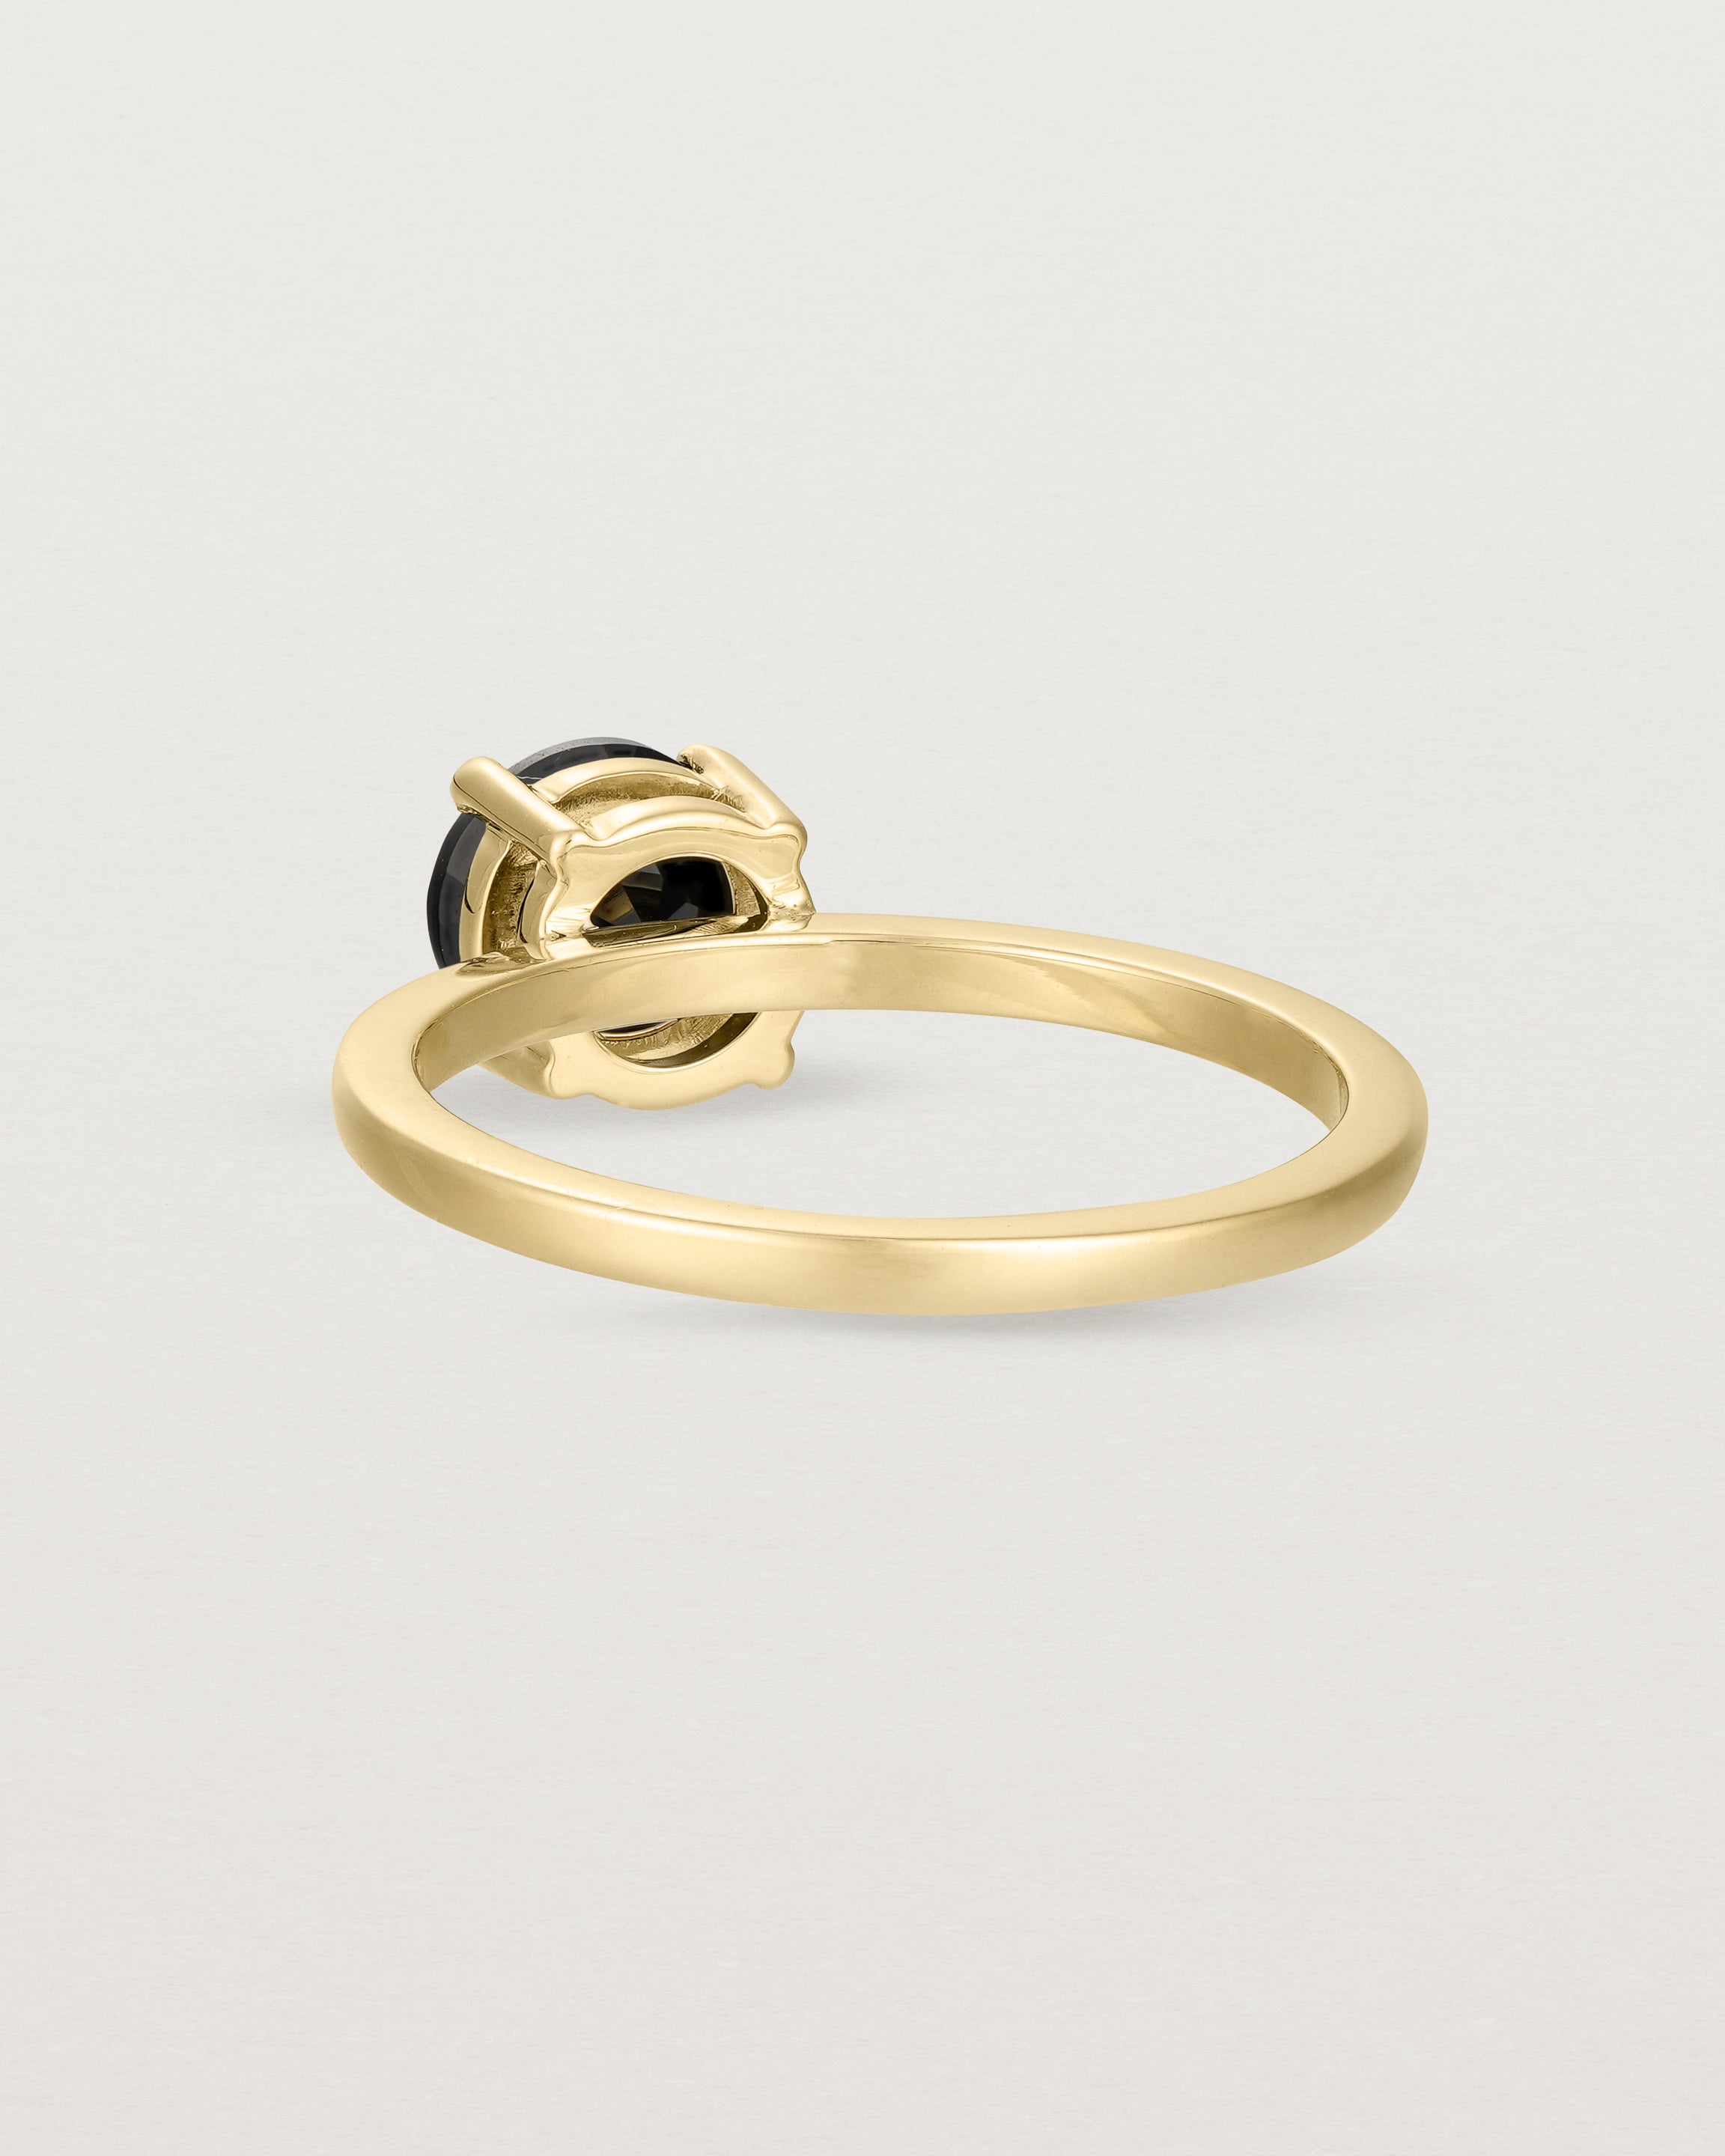 Back view of the Petite Una Round Solitaire | Black Spinel | Yellow Gold.